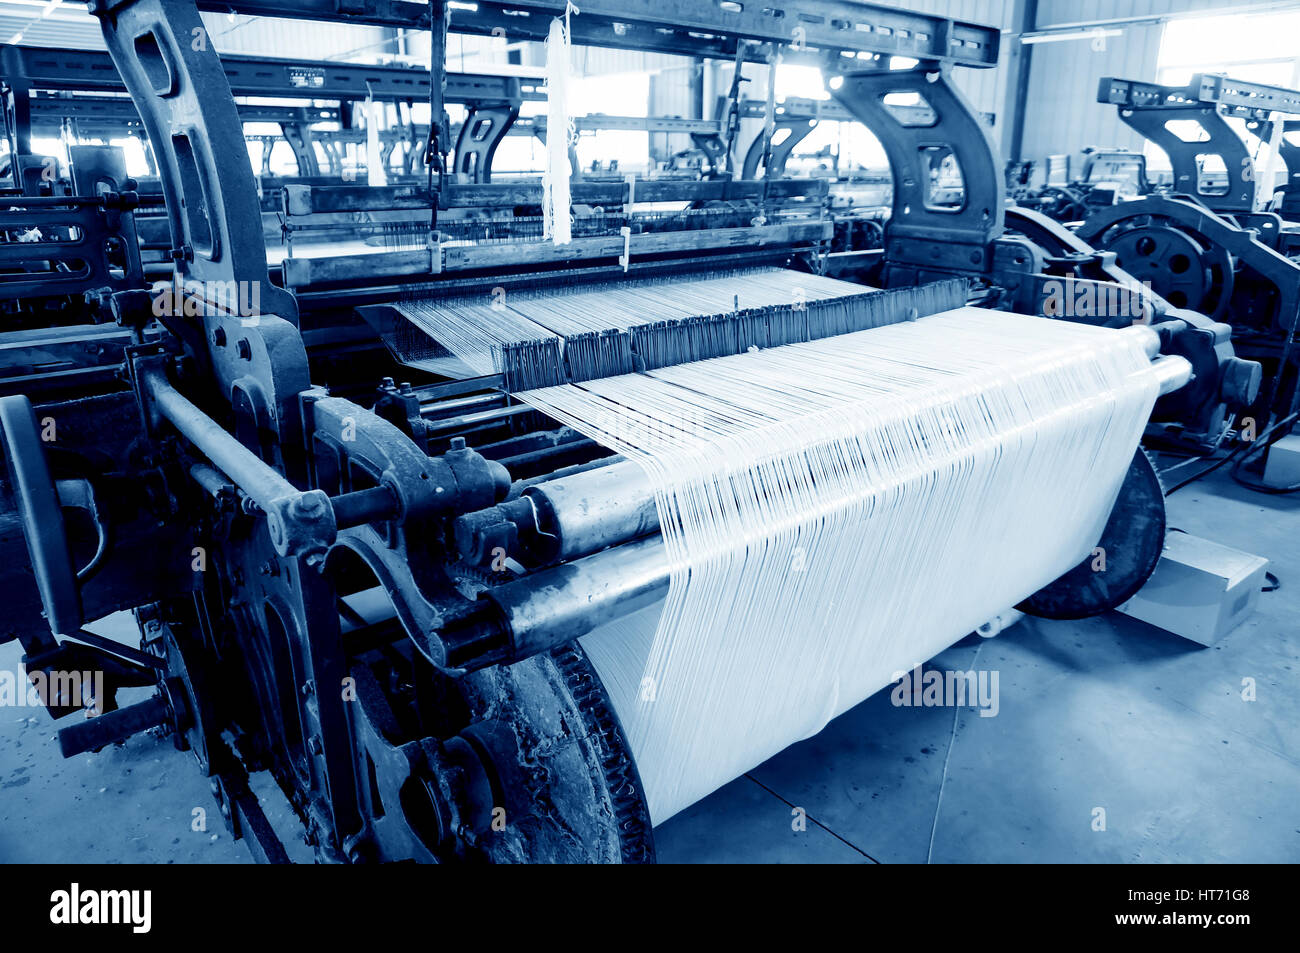 A row of textile looms weaving cotton yarn in a textile mill. Stock Photo